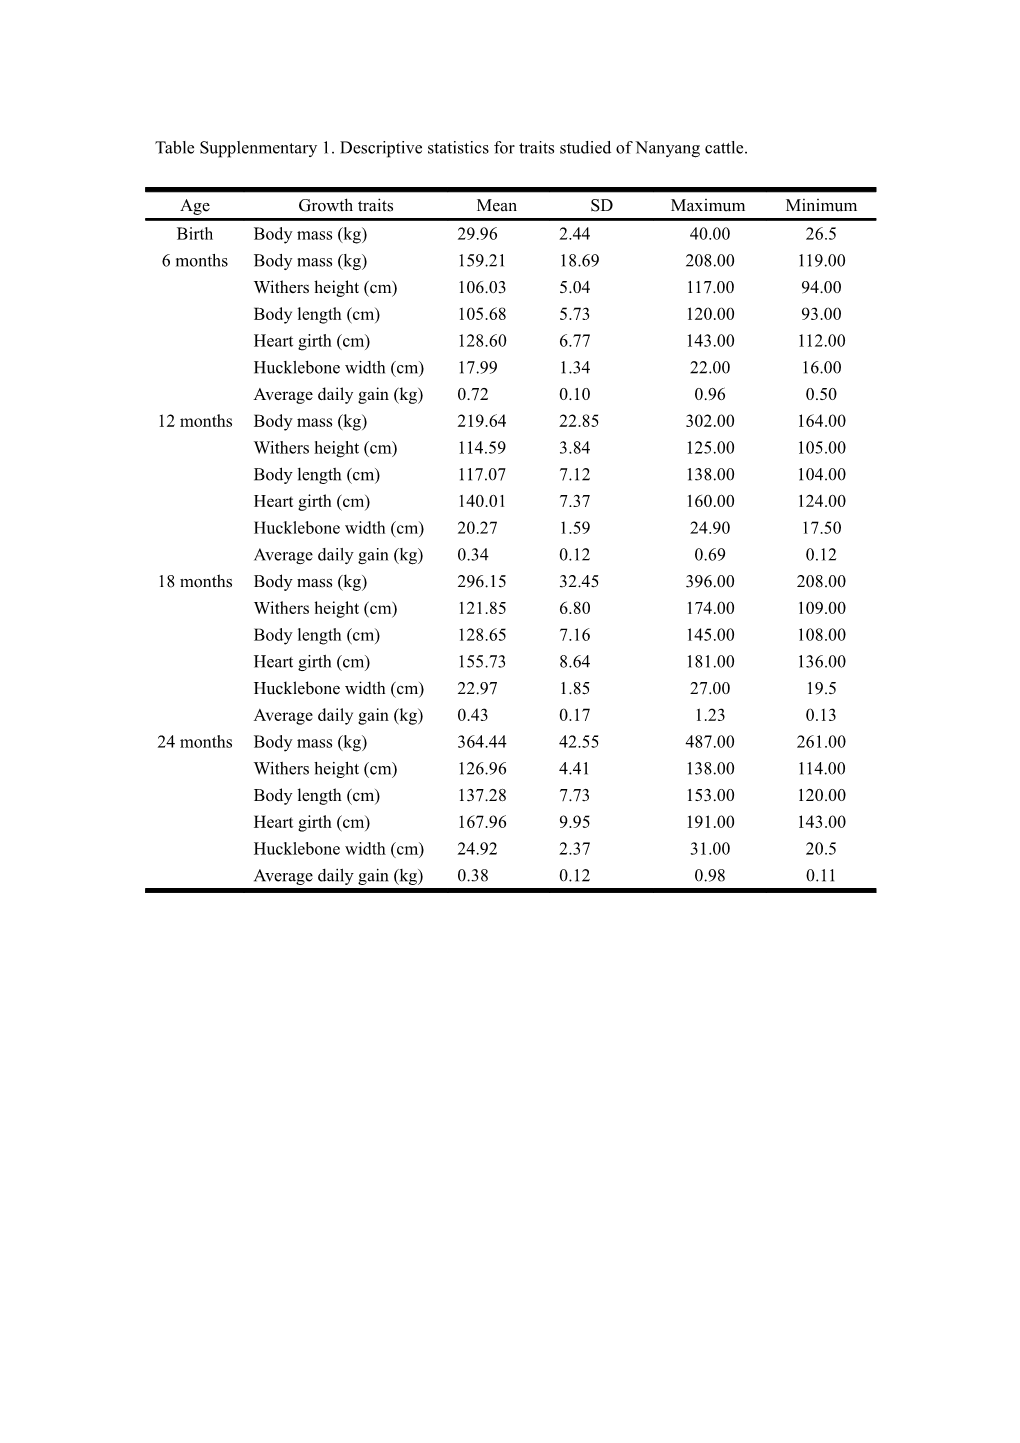 Tablesupplenmentary 1. Descriptive Statistics for Traits Studied of Nanyang Cattle